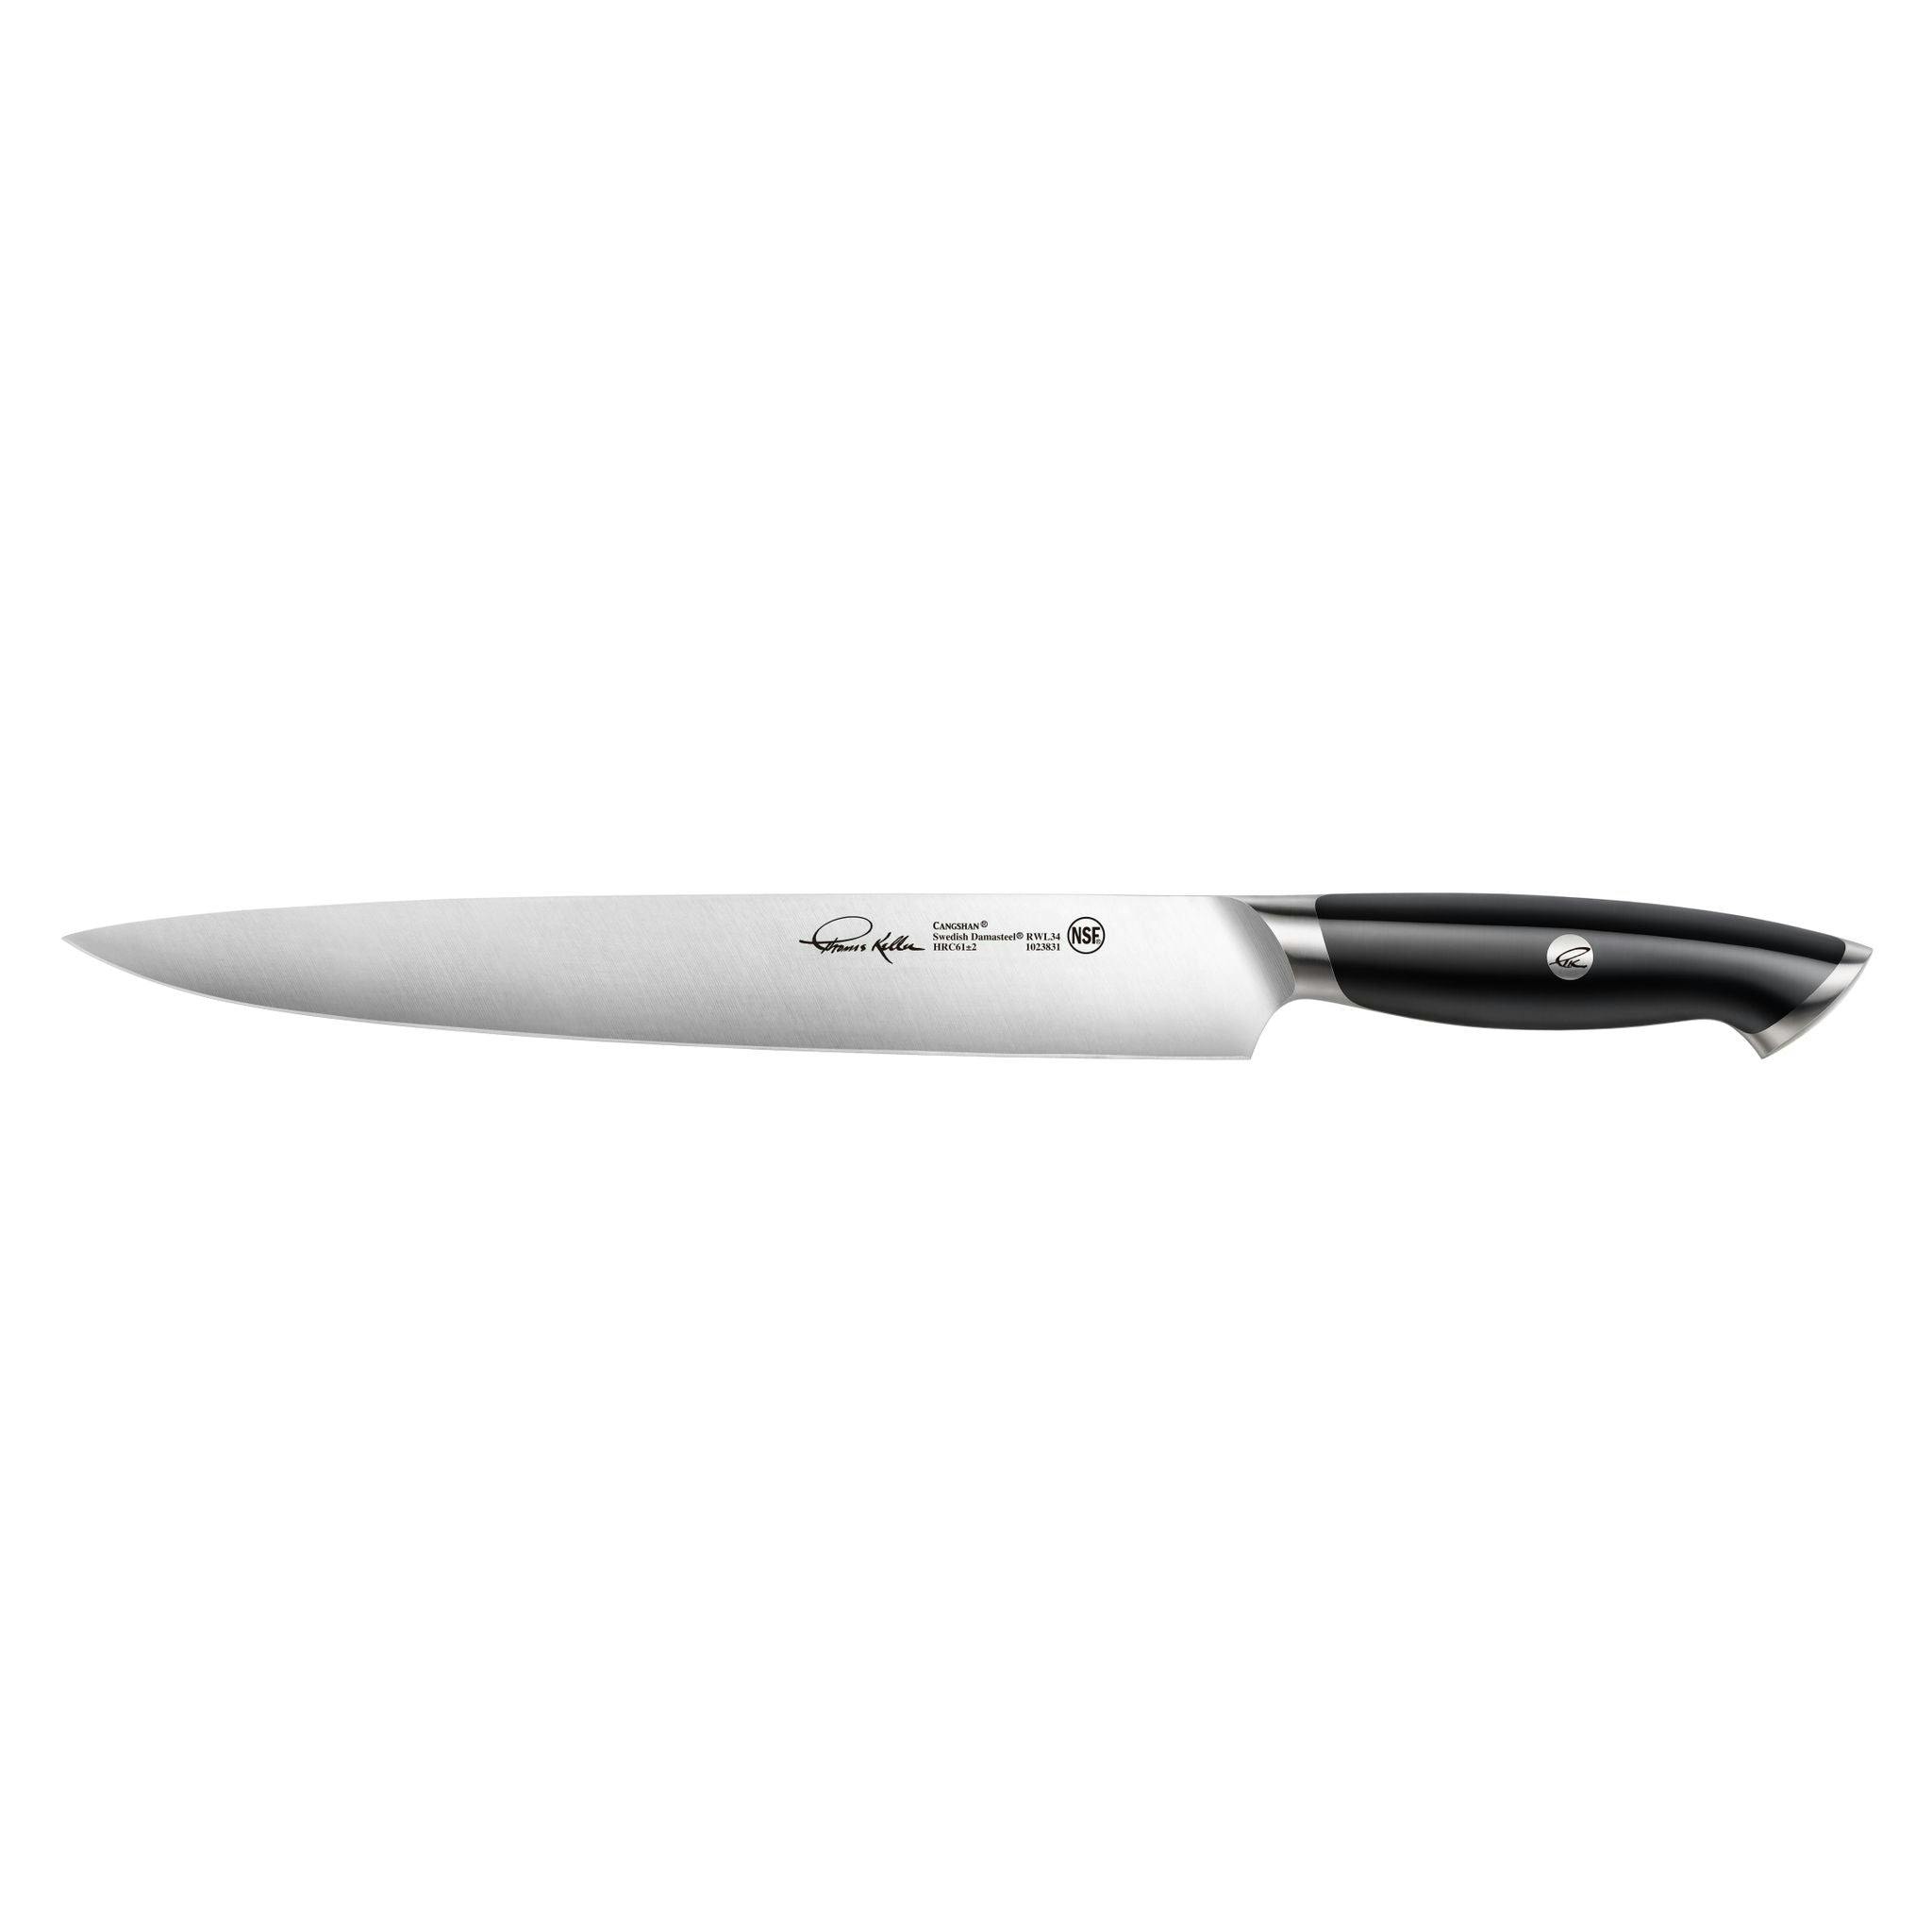 Cangshan Thomas Keller Signature Collection 10.5" Carving Knife